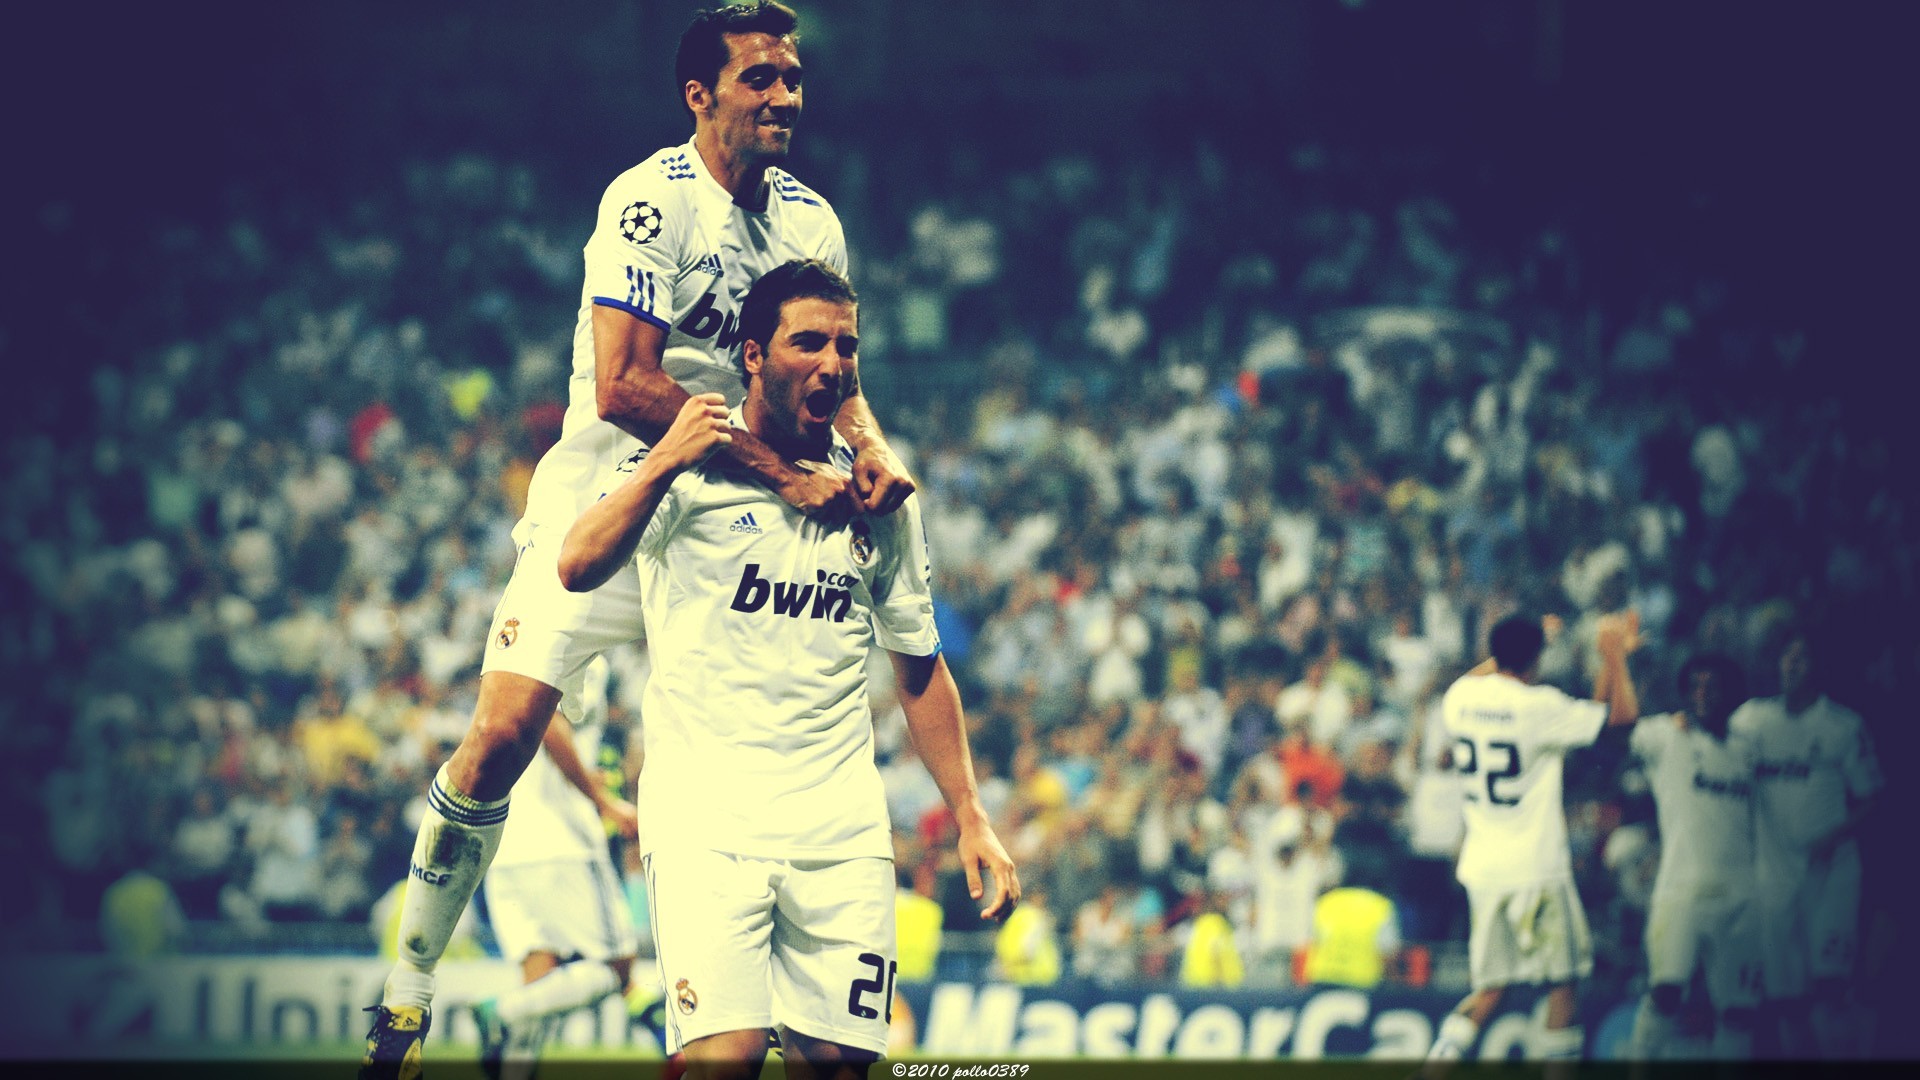 1920x1080 Real Madrid Hd Wallpapers 1080p 30220, a collection of wallpaper on .